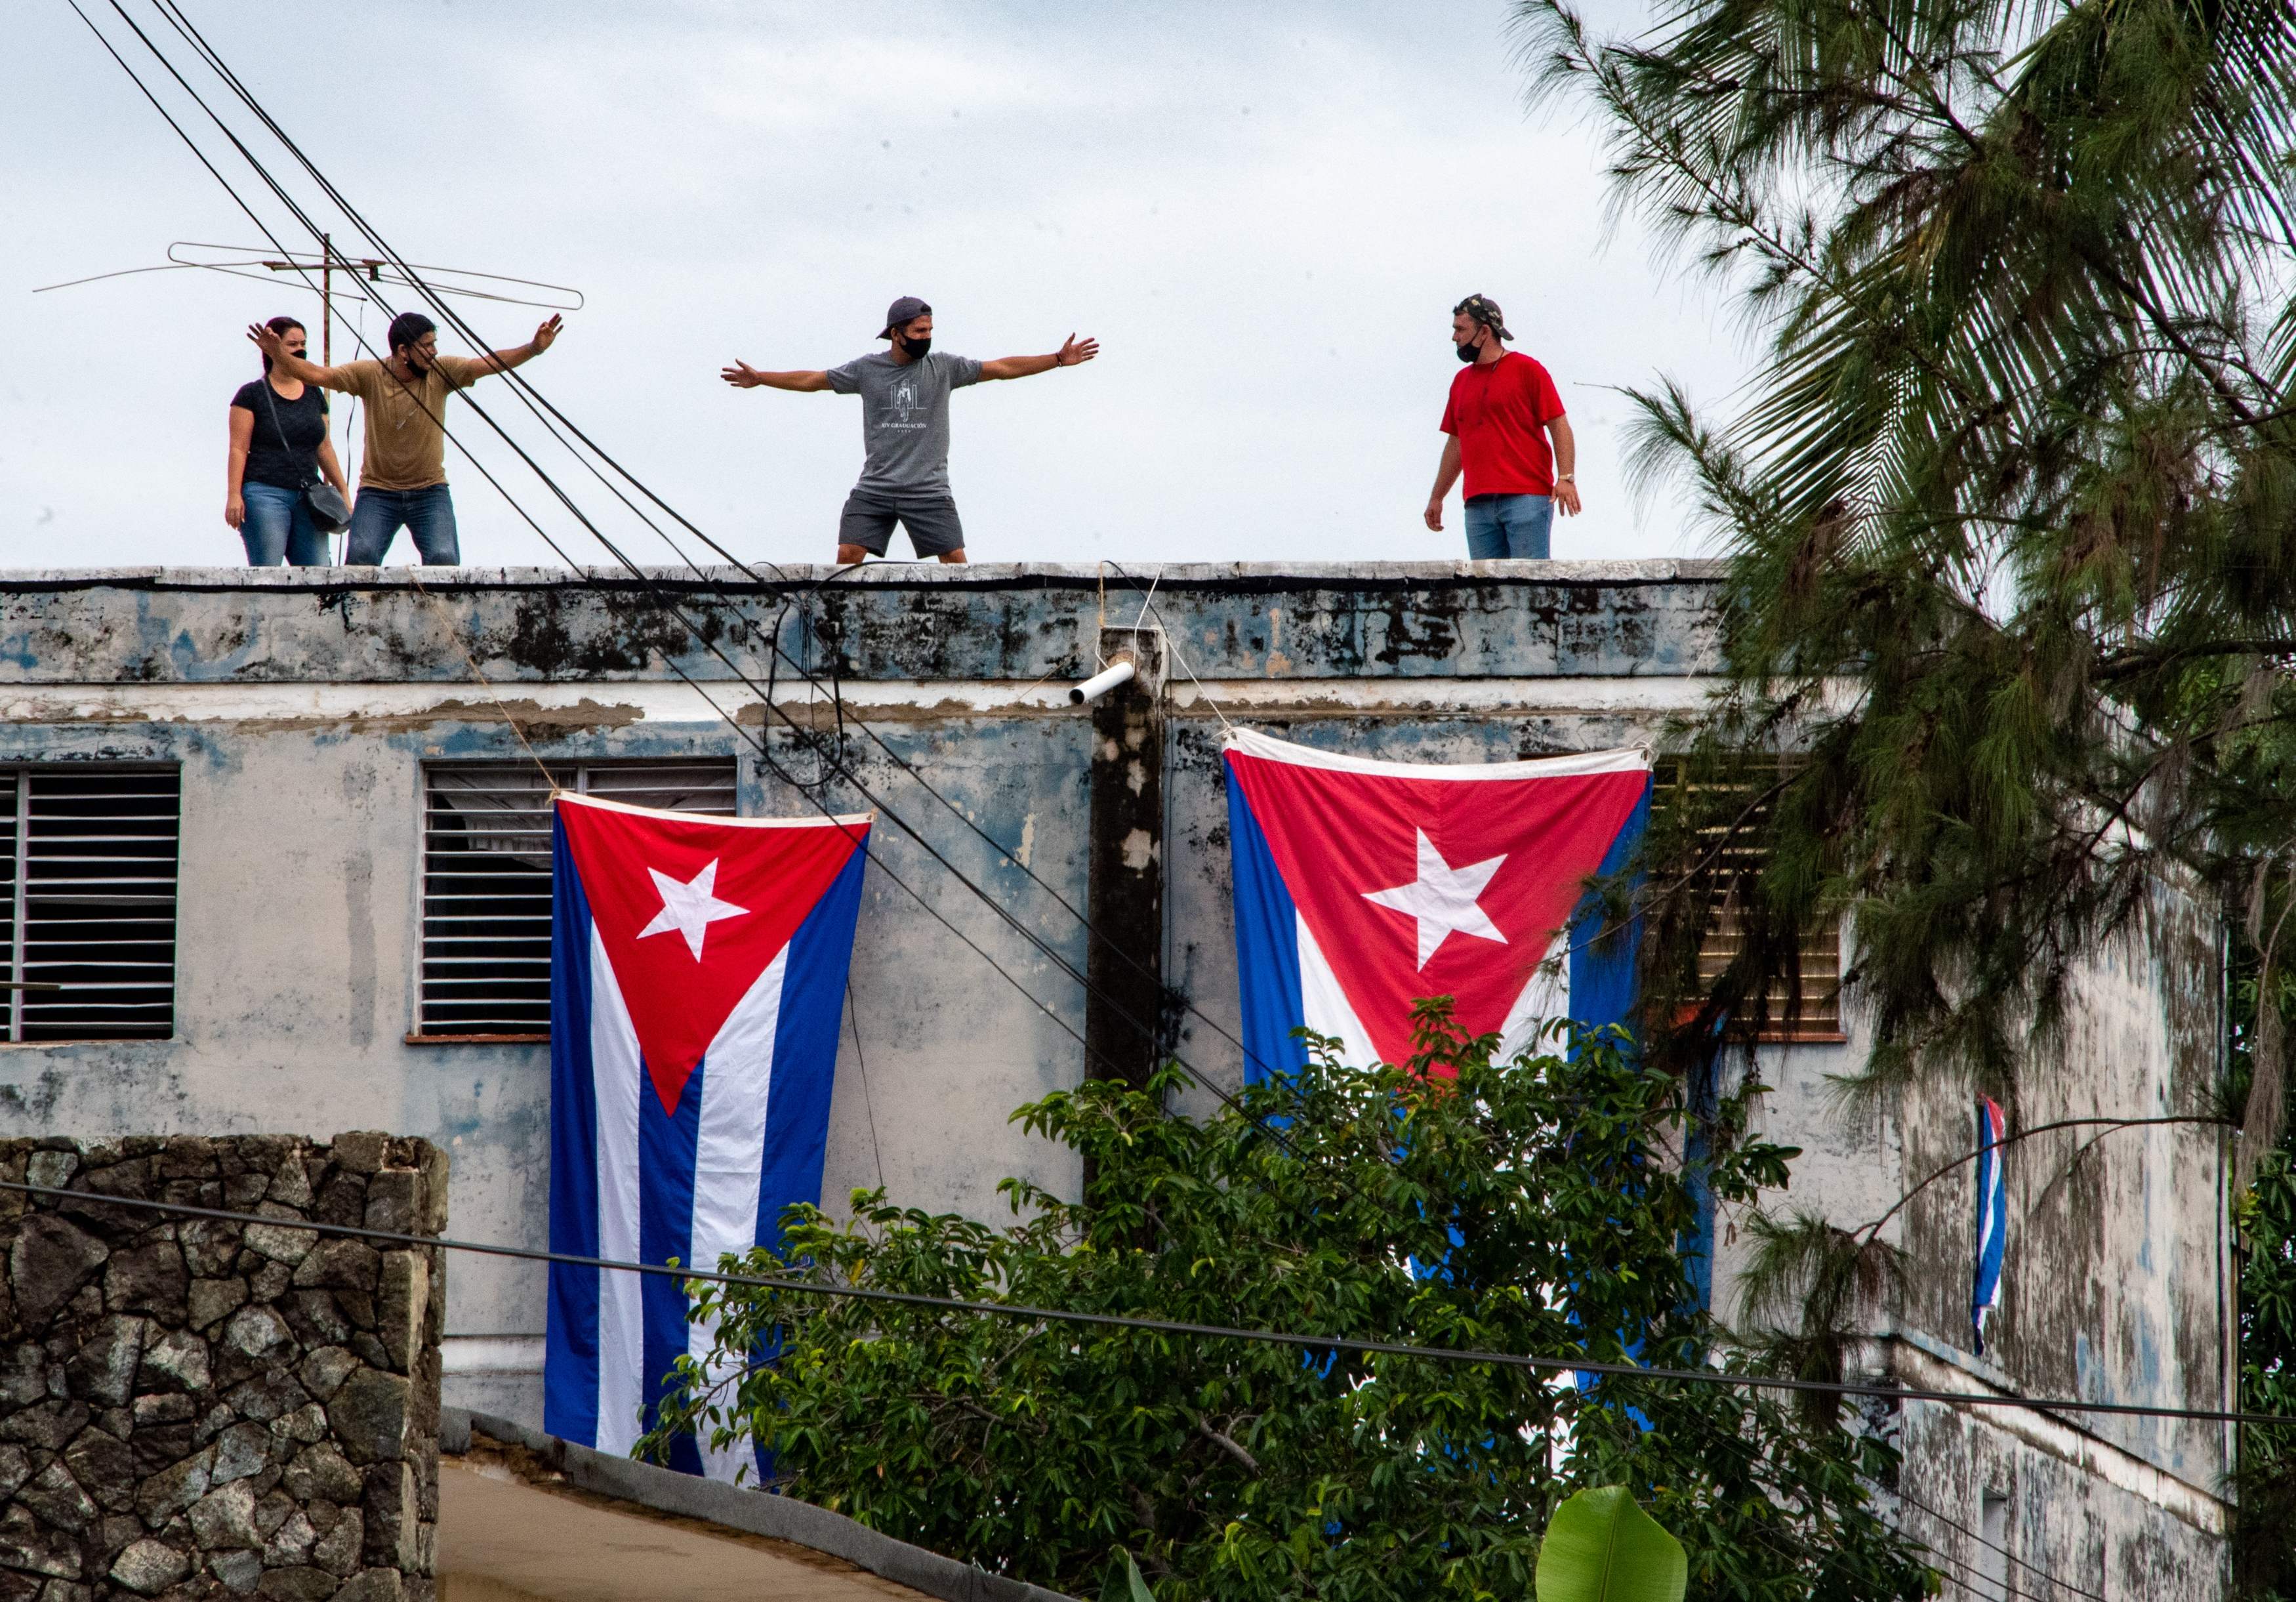 Pro-government protesters cover the apartment of Yunior Garcia, the organizer of Monday’s marches, with Cuban flags in Havana on 14 November